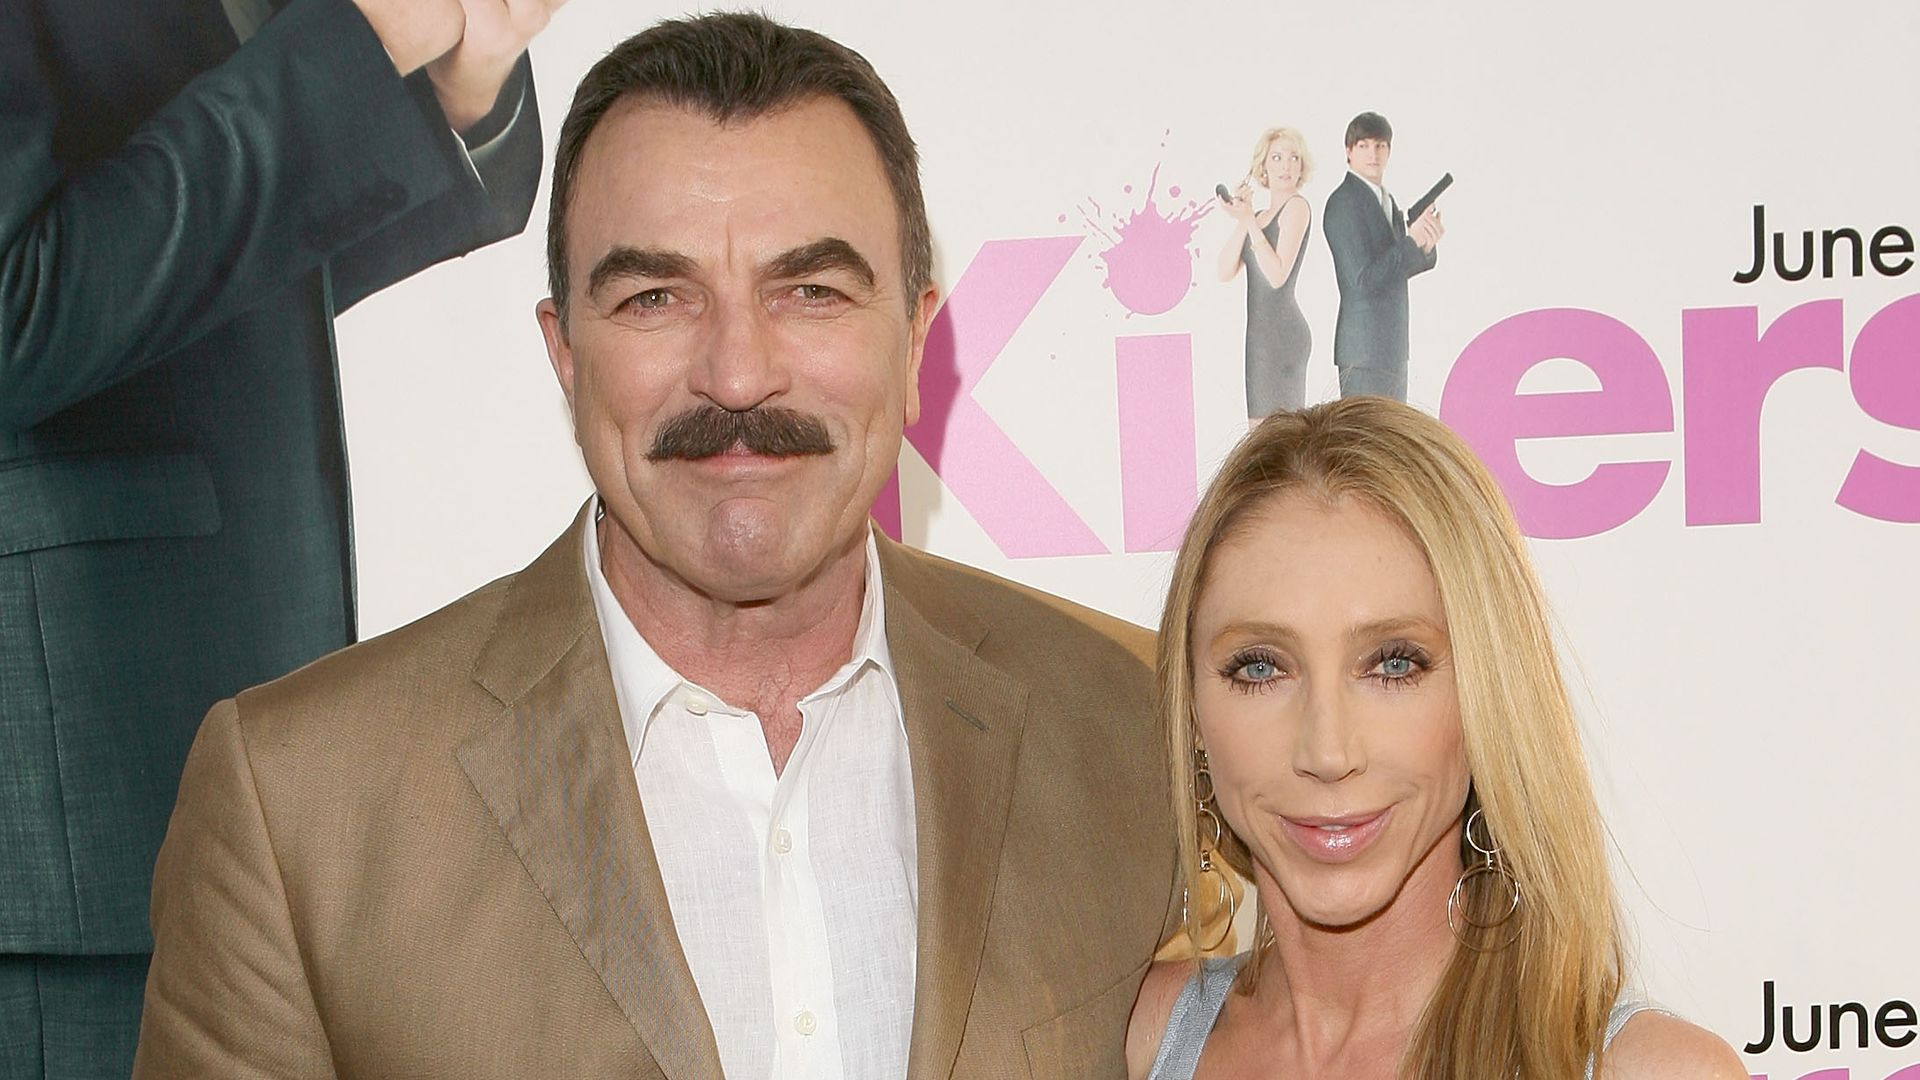 Inside the inspiring love story of Blue Blood’s Tom Selleck, 79 and his wife Jillie Mack, 66